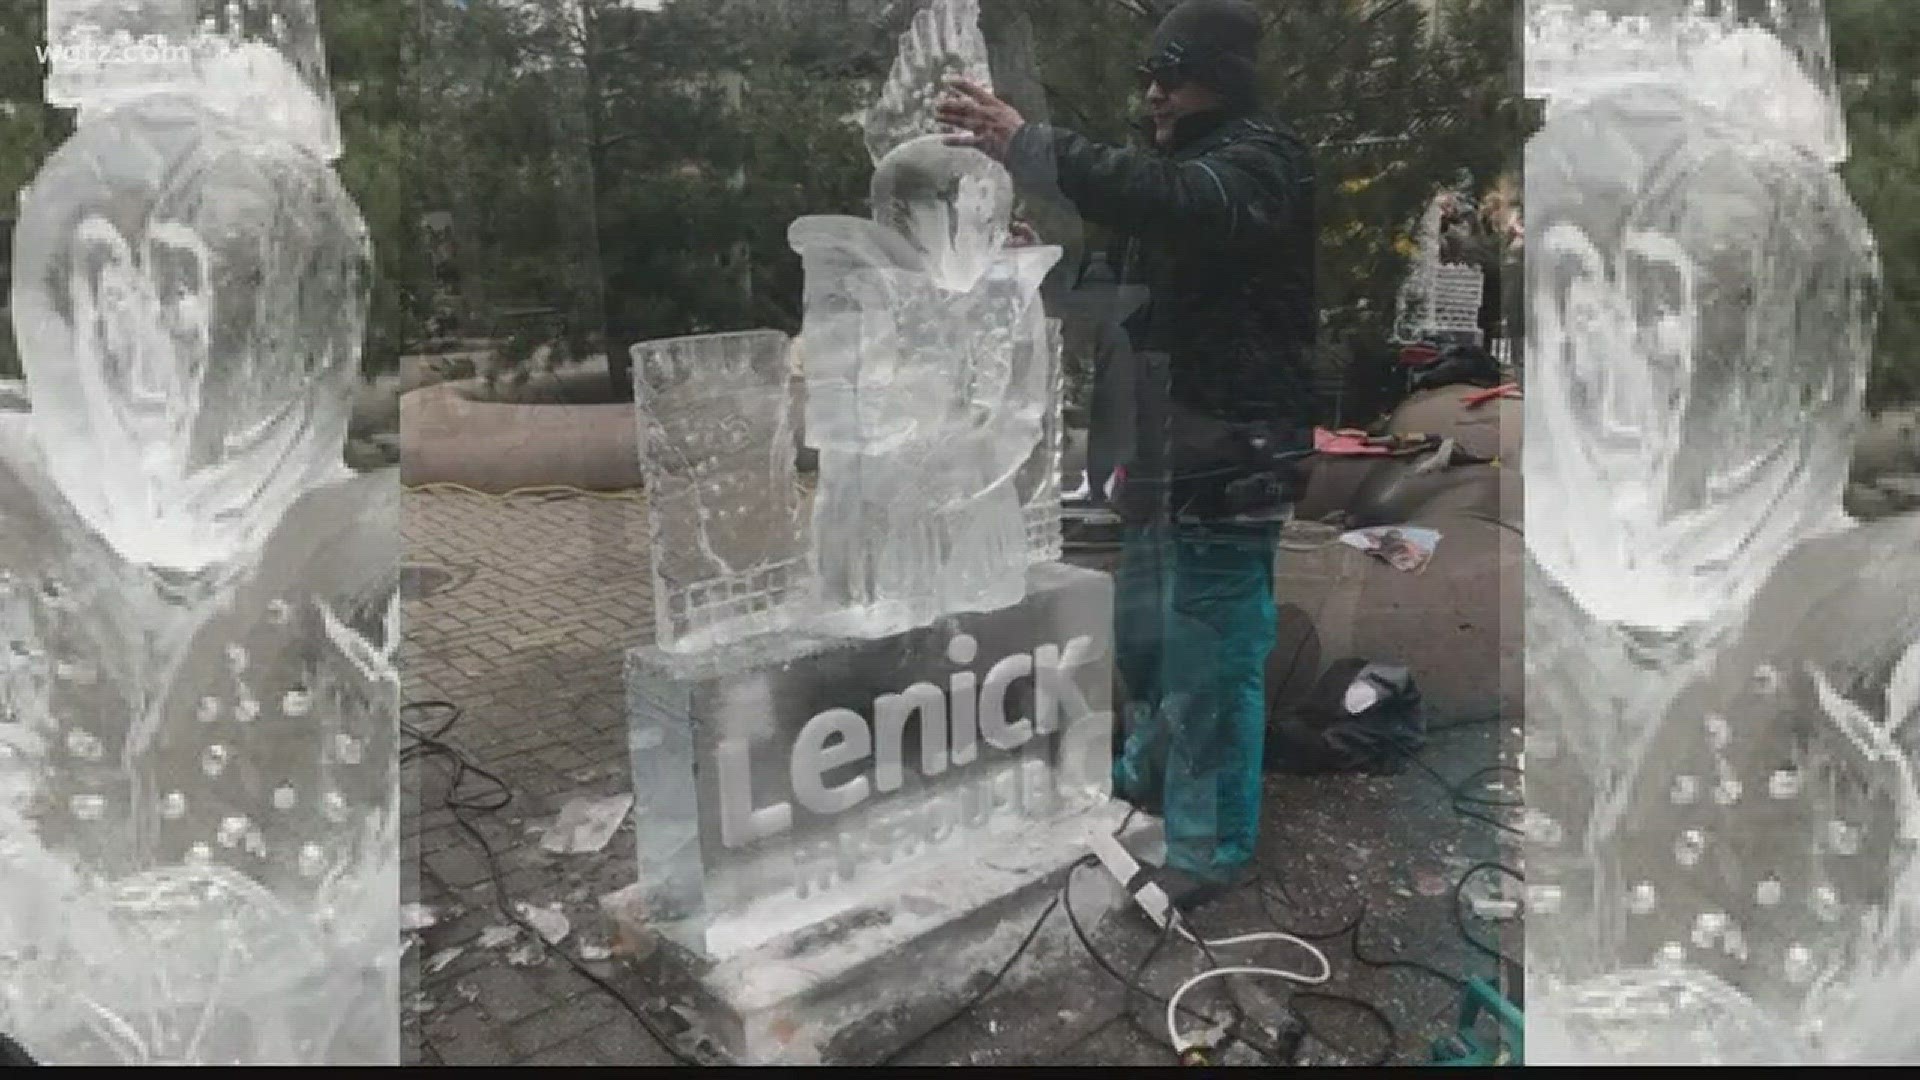 Buffalo ice sculptor competed in Toronto